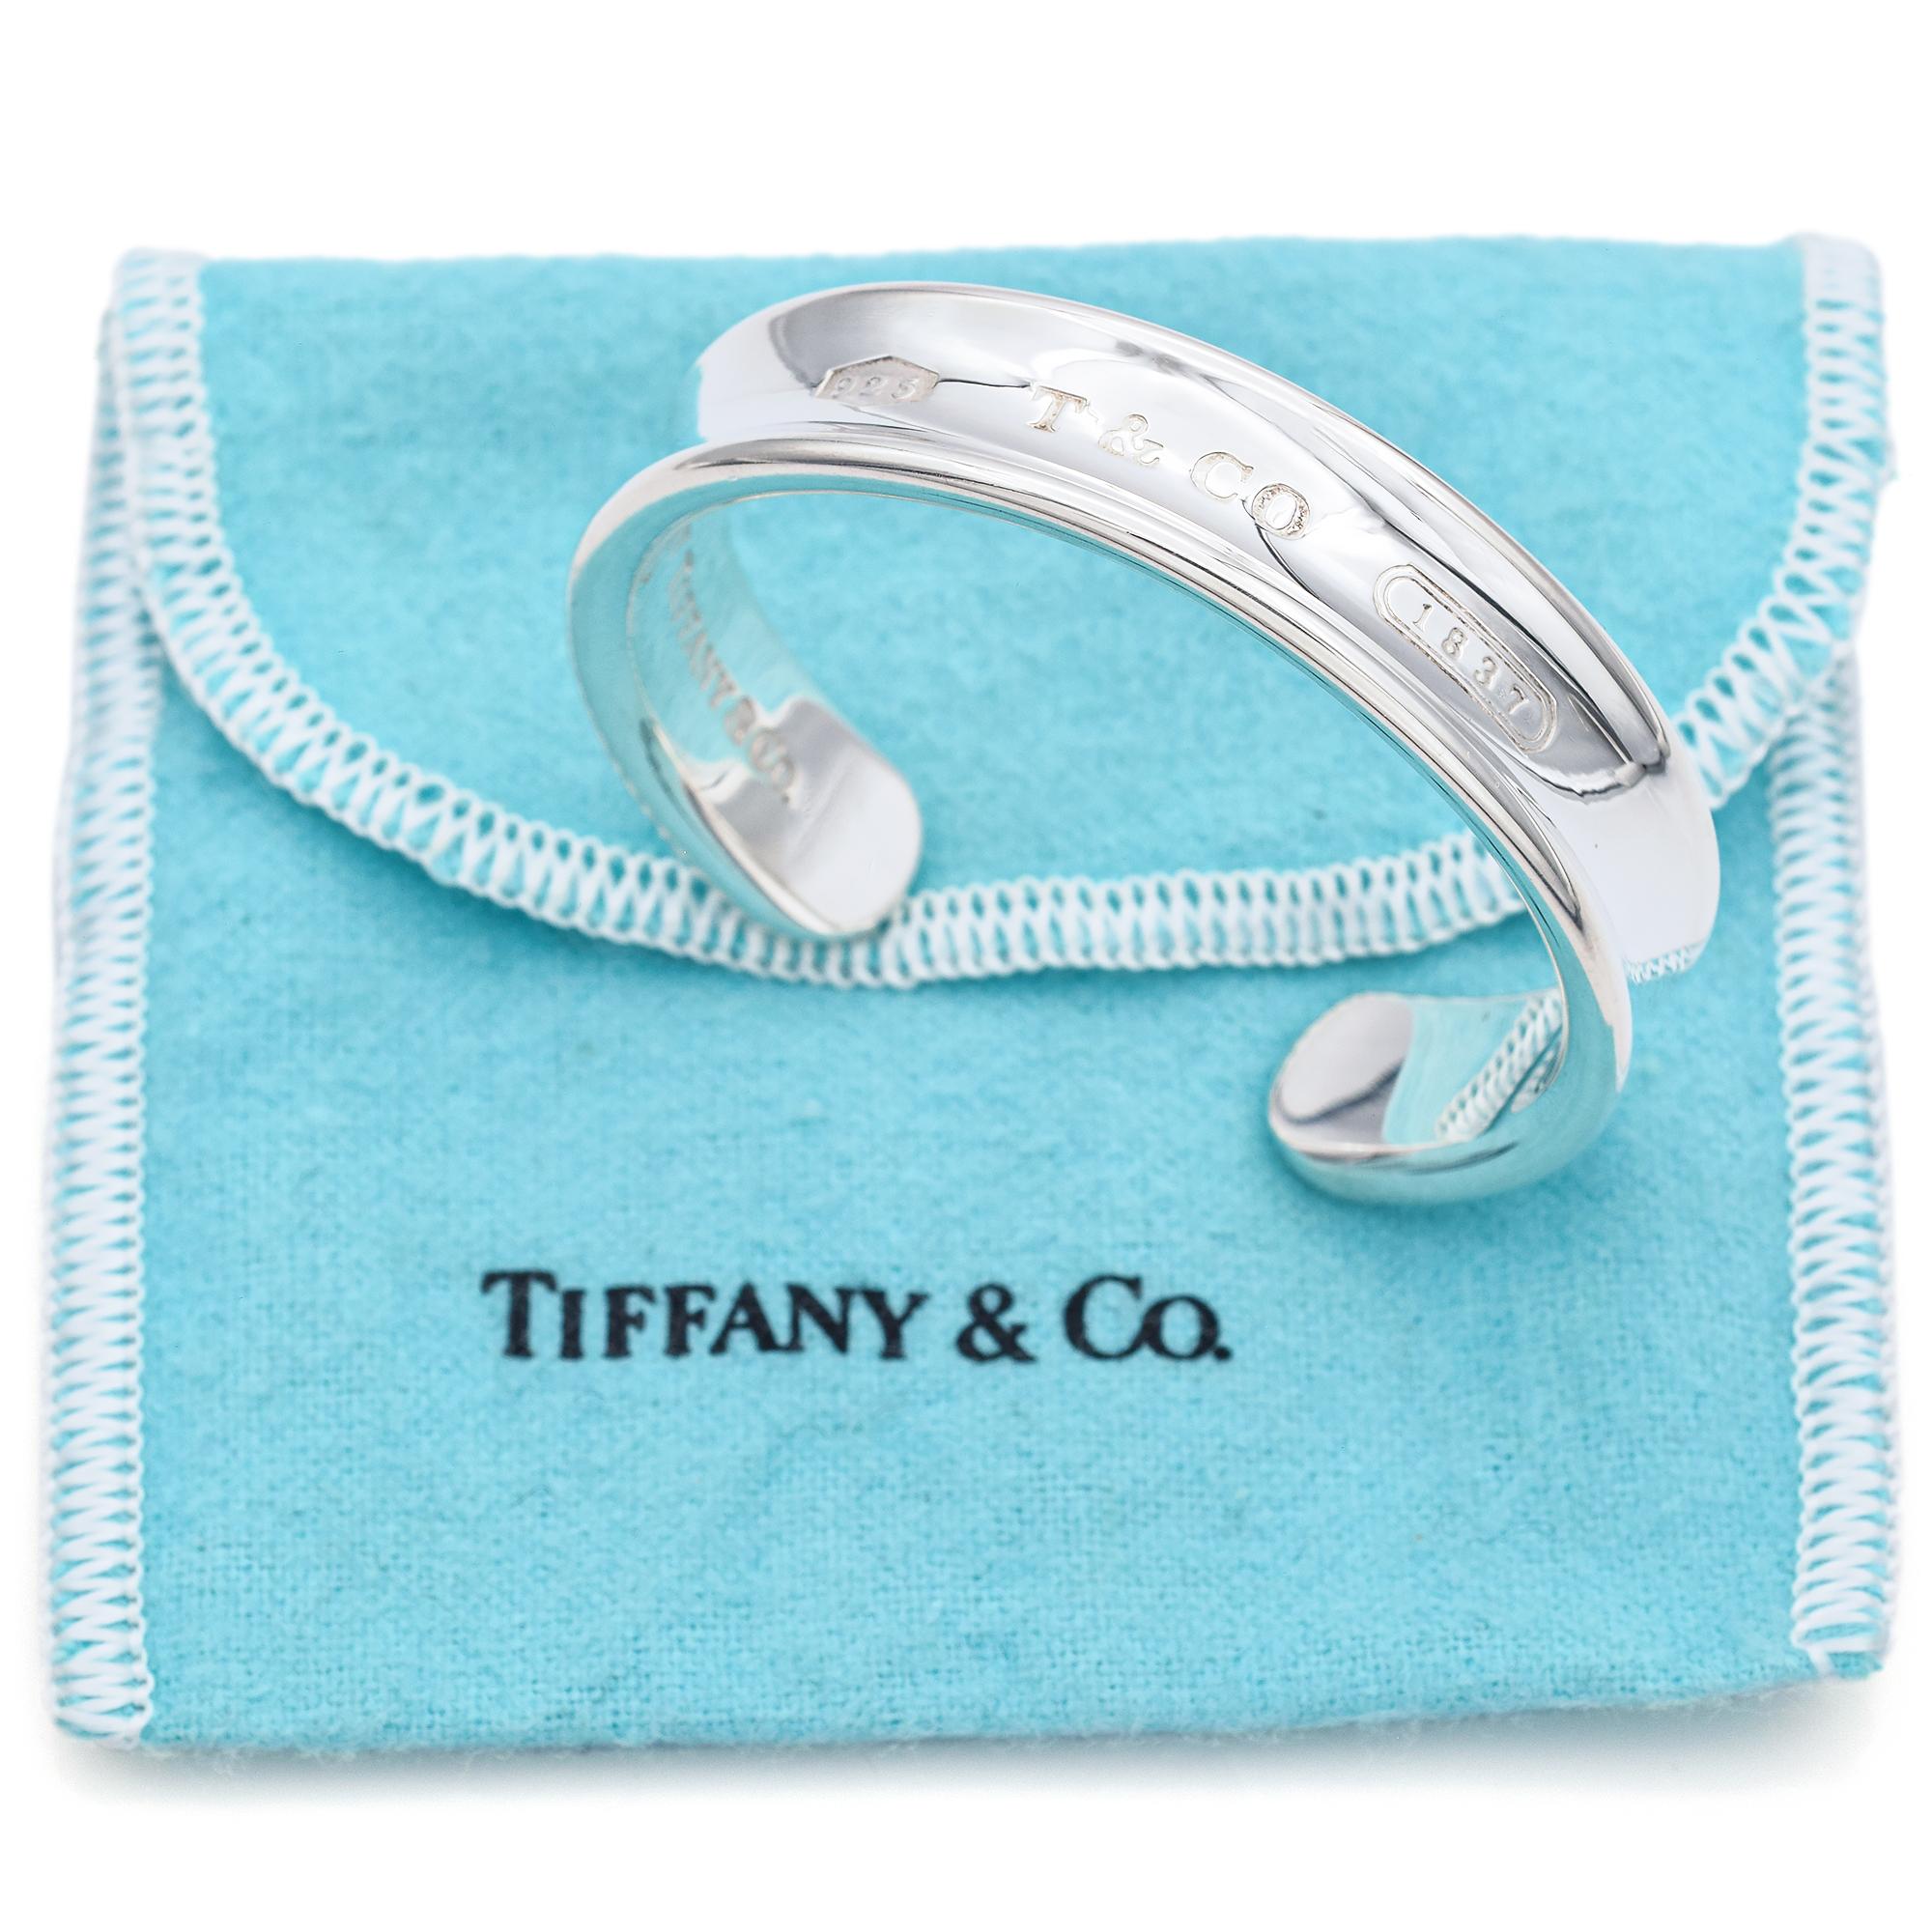 Weight: 42.2 Grams 
Width: 12 mm
Bracelet Size: 5.75 Inches
Hallmark:  T&CO 925 Tiffany & Co. 1837

ITEM #: BR-1062-092823-05